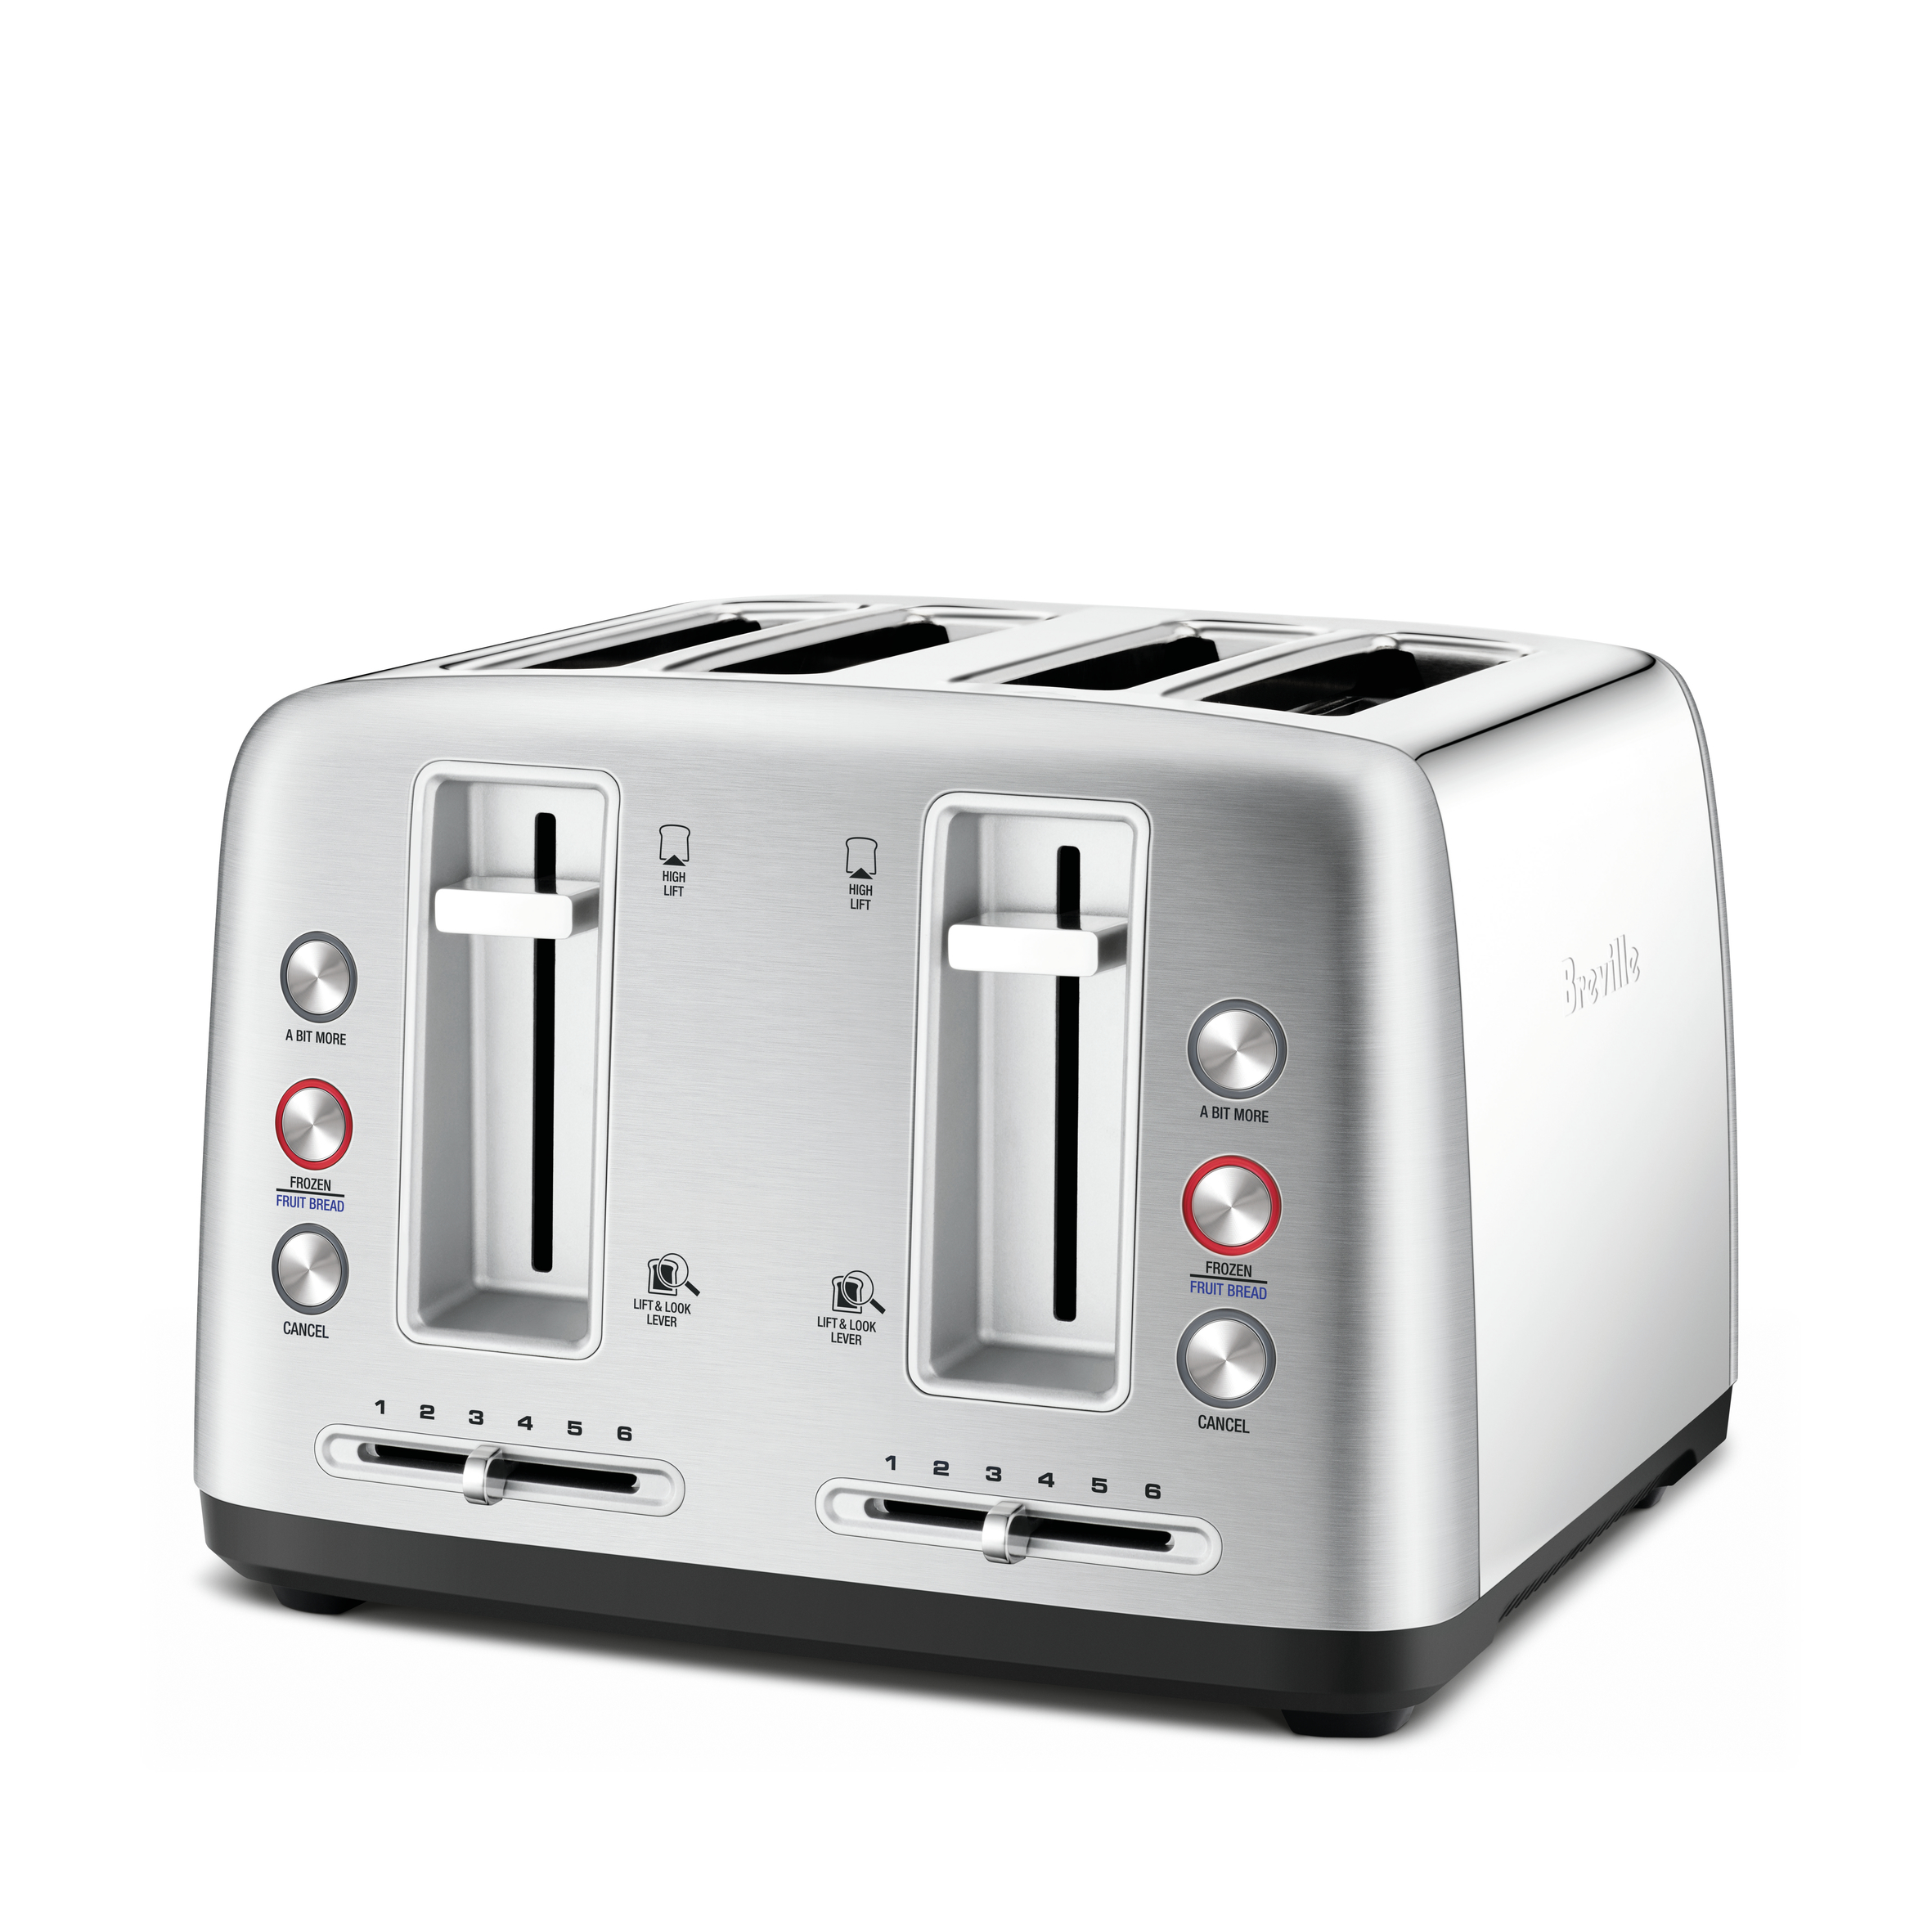 https://www.breville.com/content/dam/breville/au/assets/toasters/finished-goods/bta670-the-toast-control-4-slice/bta670bss/images/LTA670BSS2JAN1-the-toast-control-4-slice-toasters-carousel2.jpg.jpeg